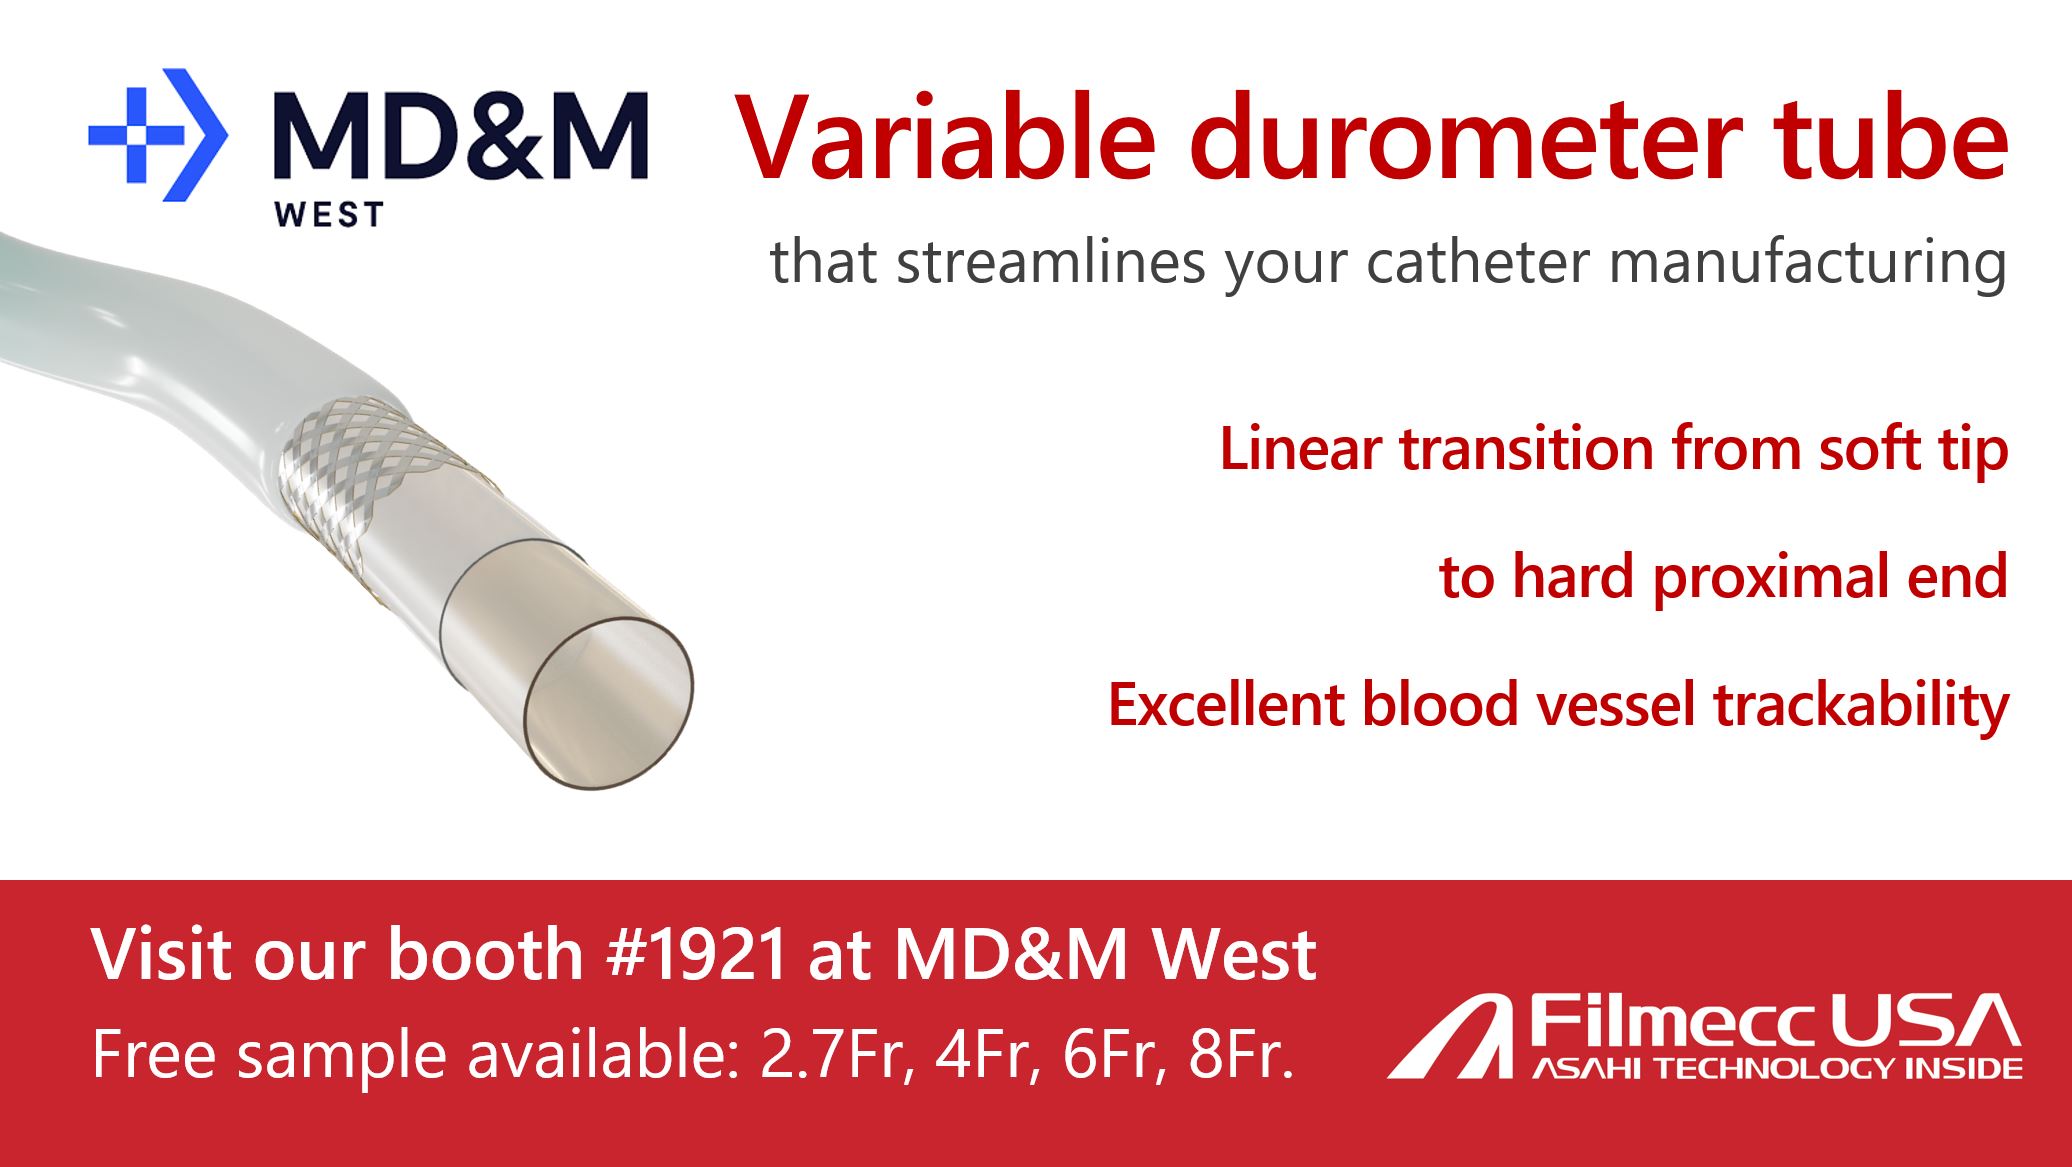 February 7-9, 2023 MD&M West (Anaheim, CA) Booth #1921